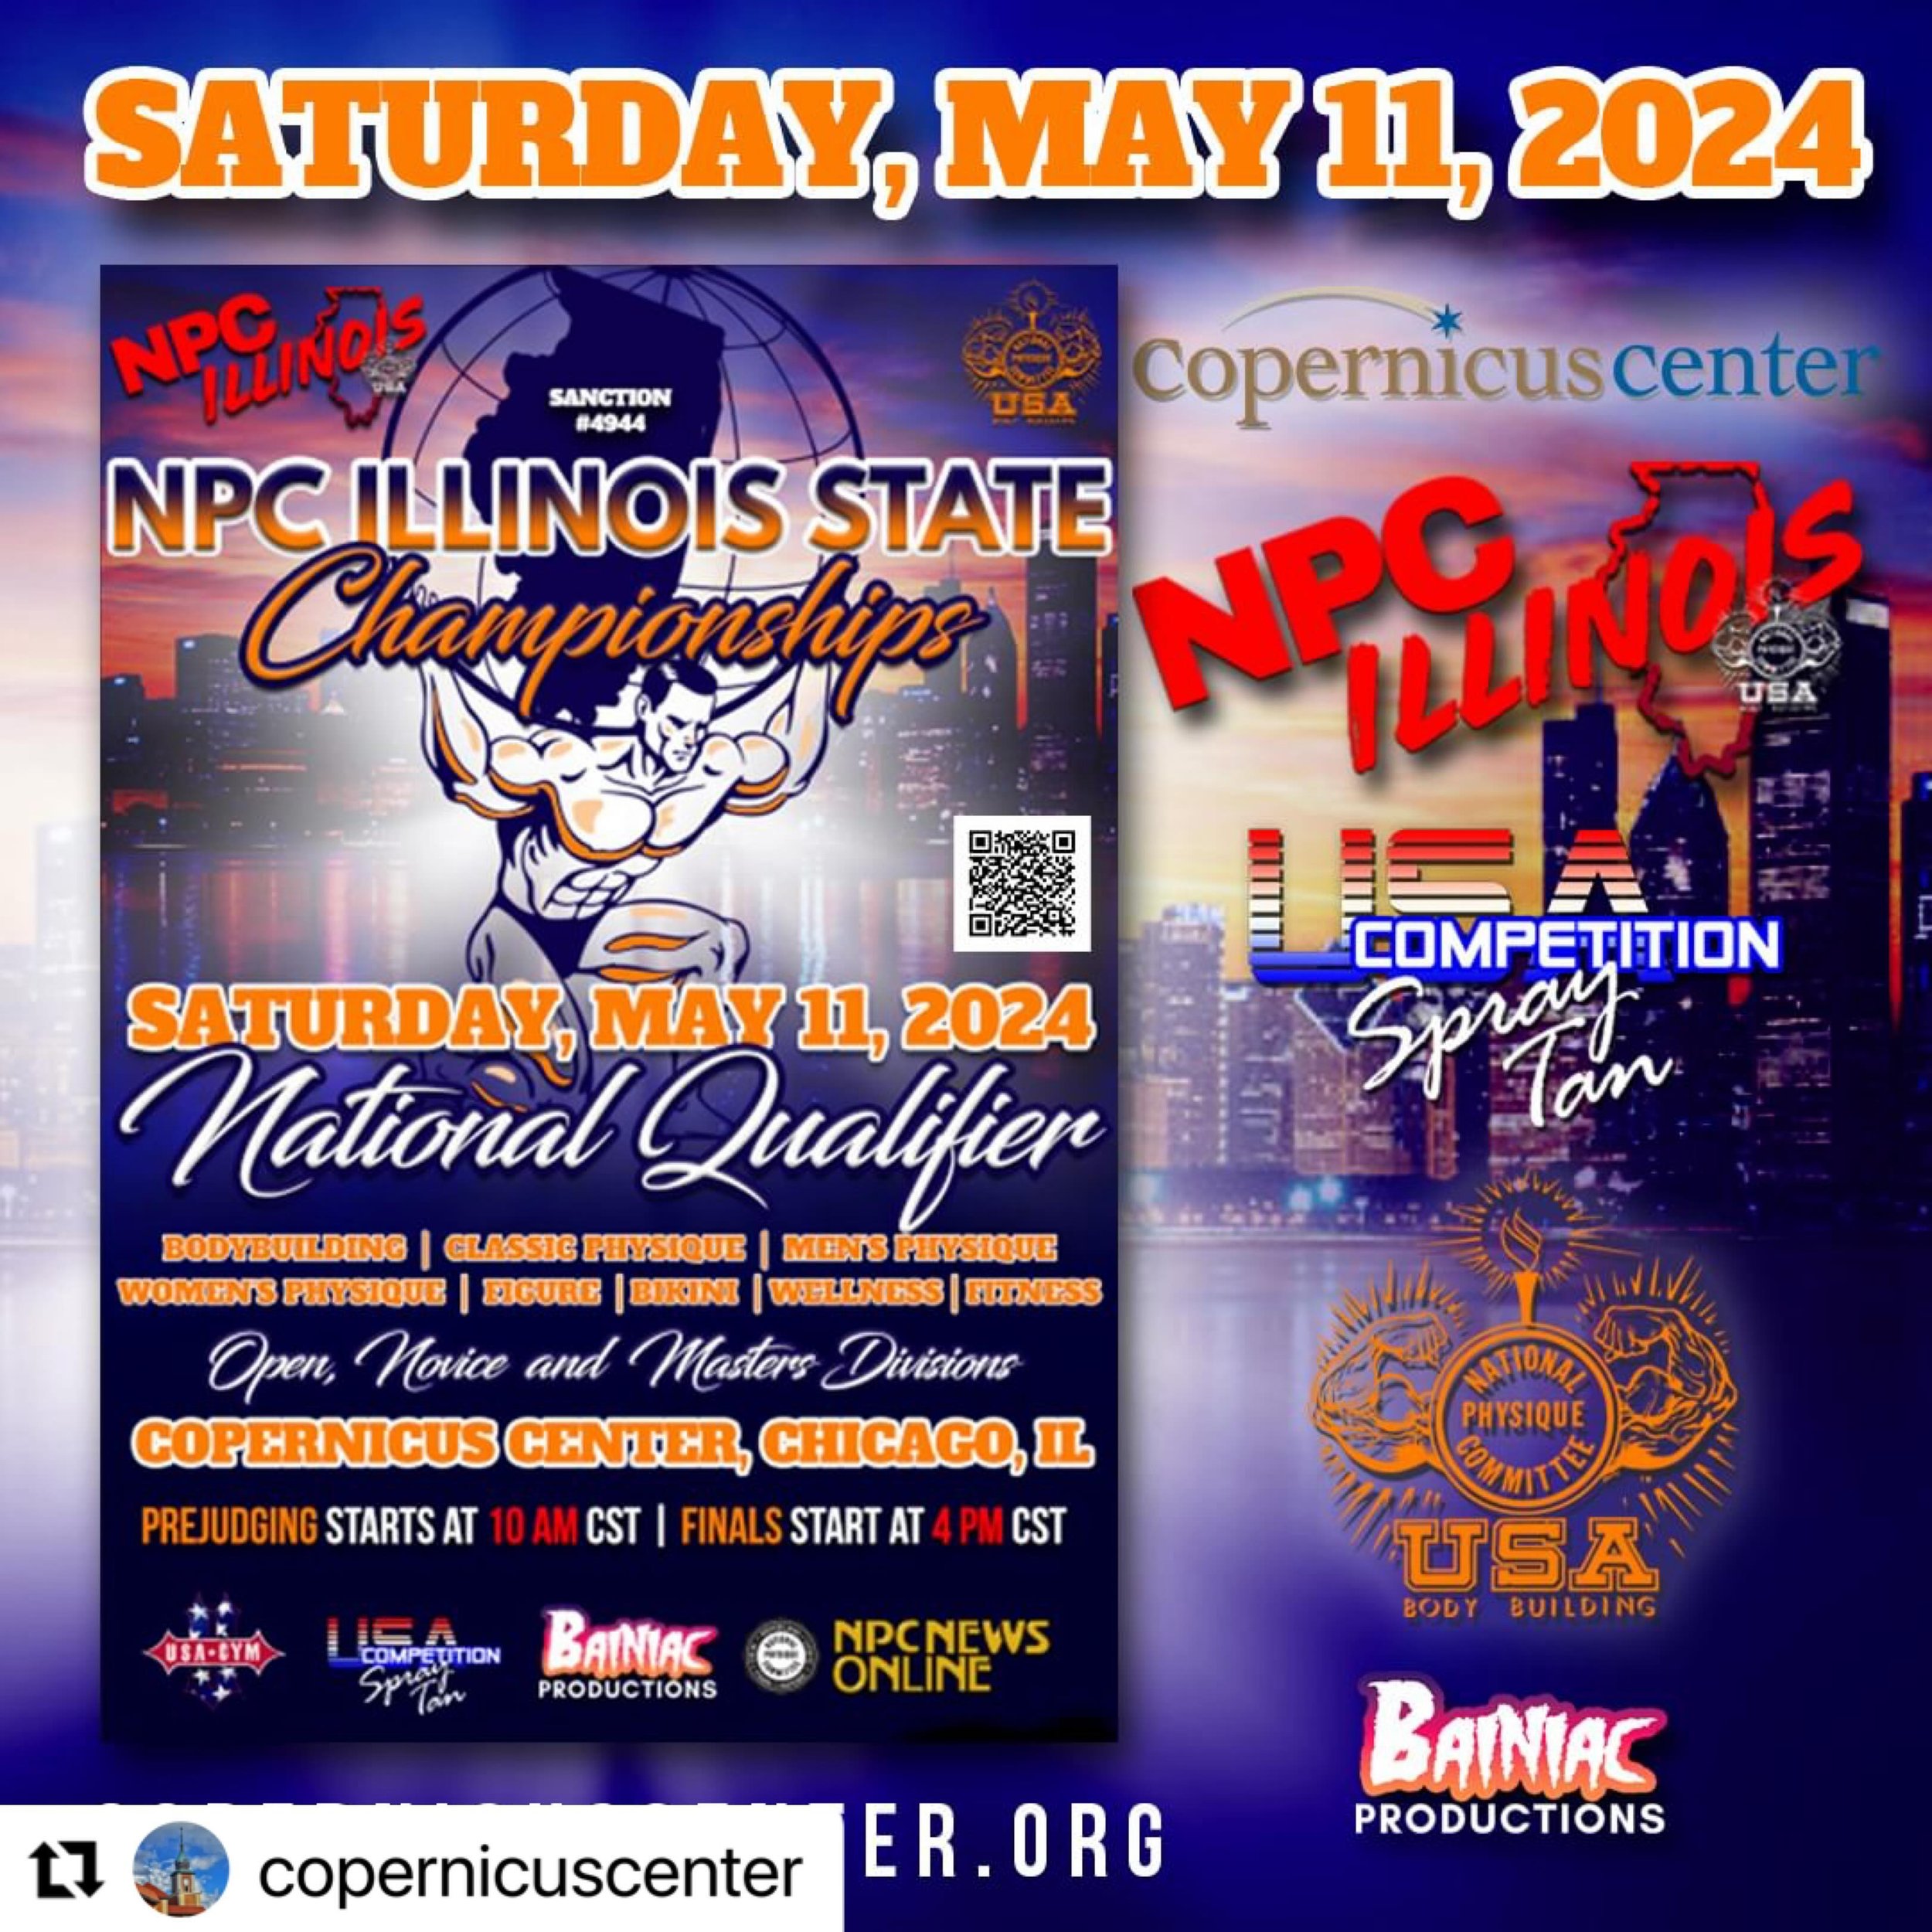 #Repost @copernicuscenter with @use.repost
・・・
NPC Illinois State Championship will be back at the Copernicus Center on May 11th. Don&rsquo;t miss it! 
► DATE:  Saturday, May 11th, 2024  TIME:  10:00am &bull;  All ages welcome
►  PREJUDGE: Theater Do